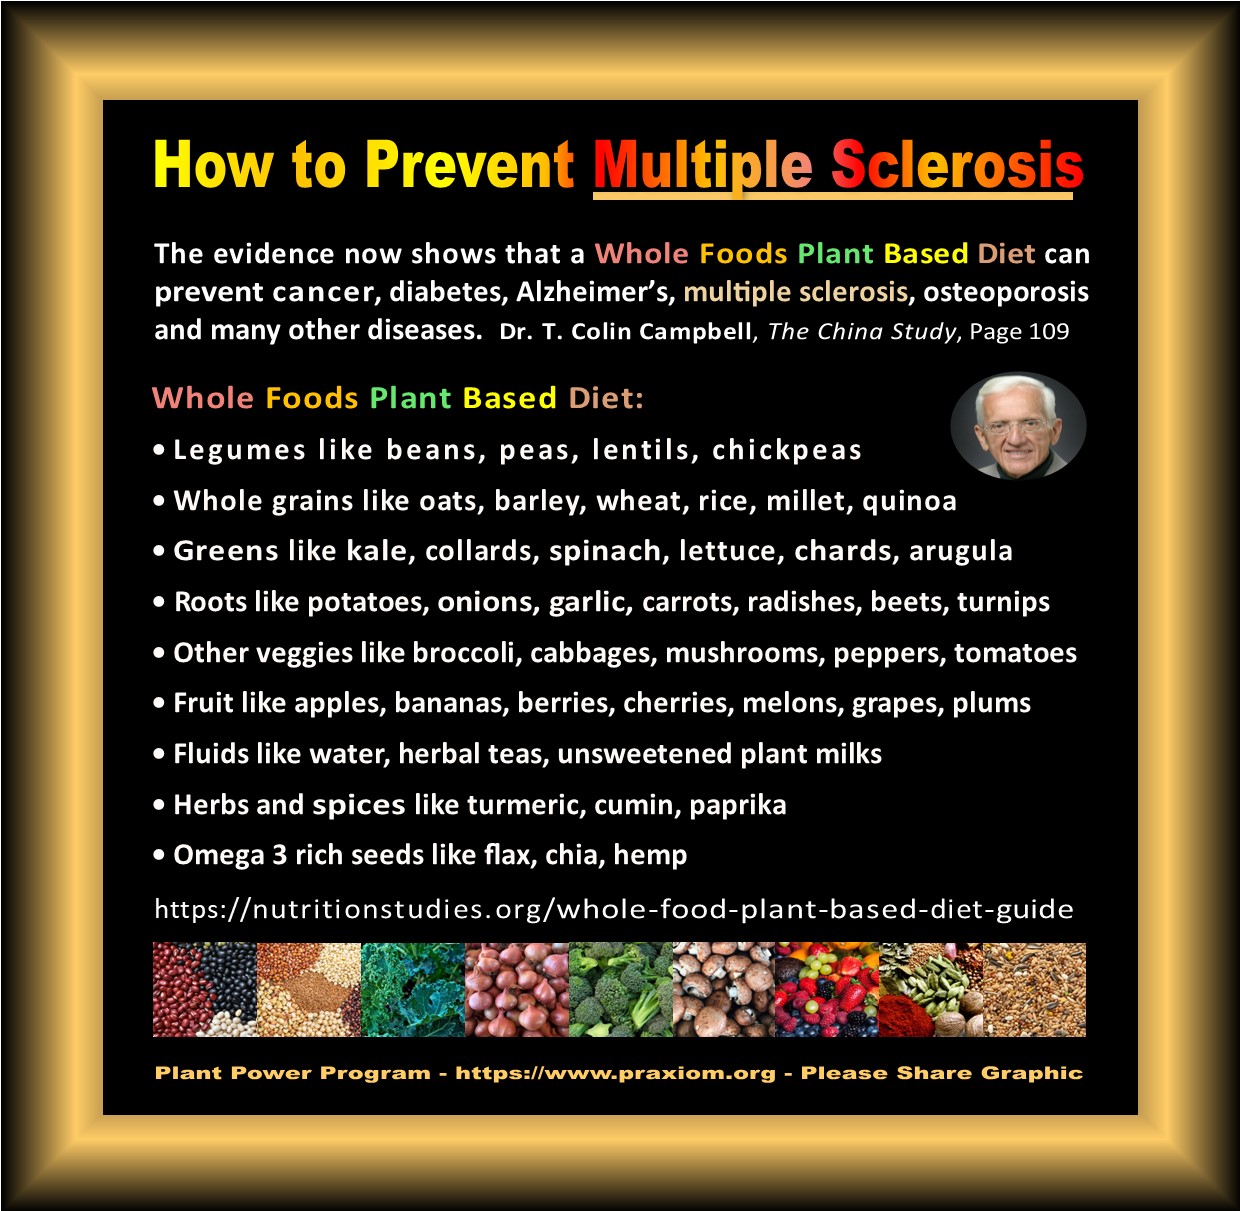 How to Prevent Multiple Sclerosis - Dr. T. Colin Campbell